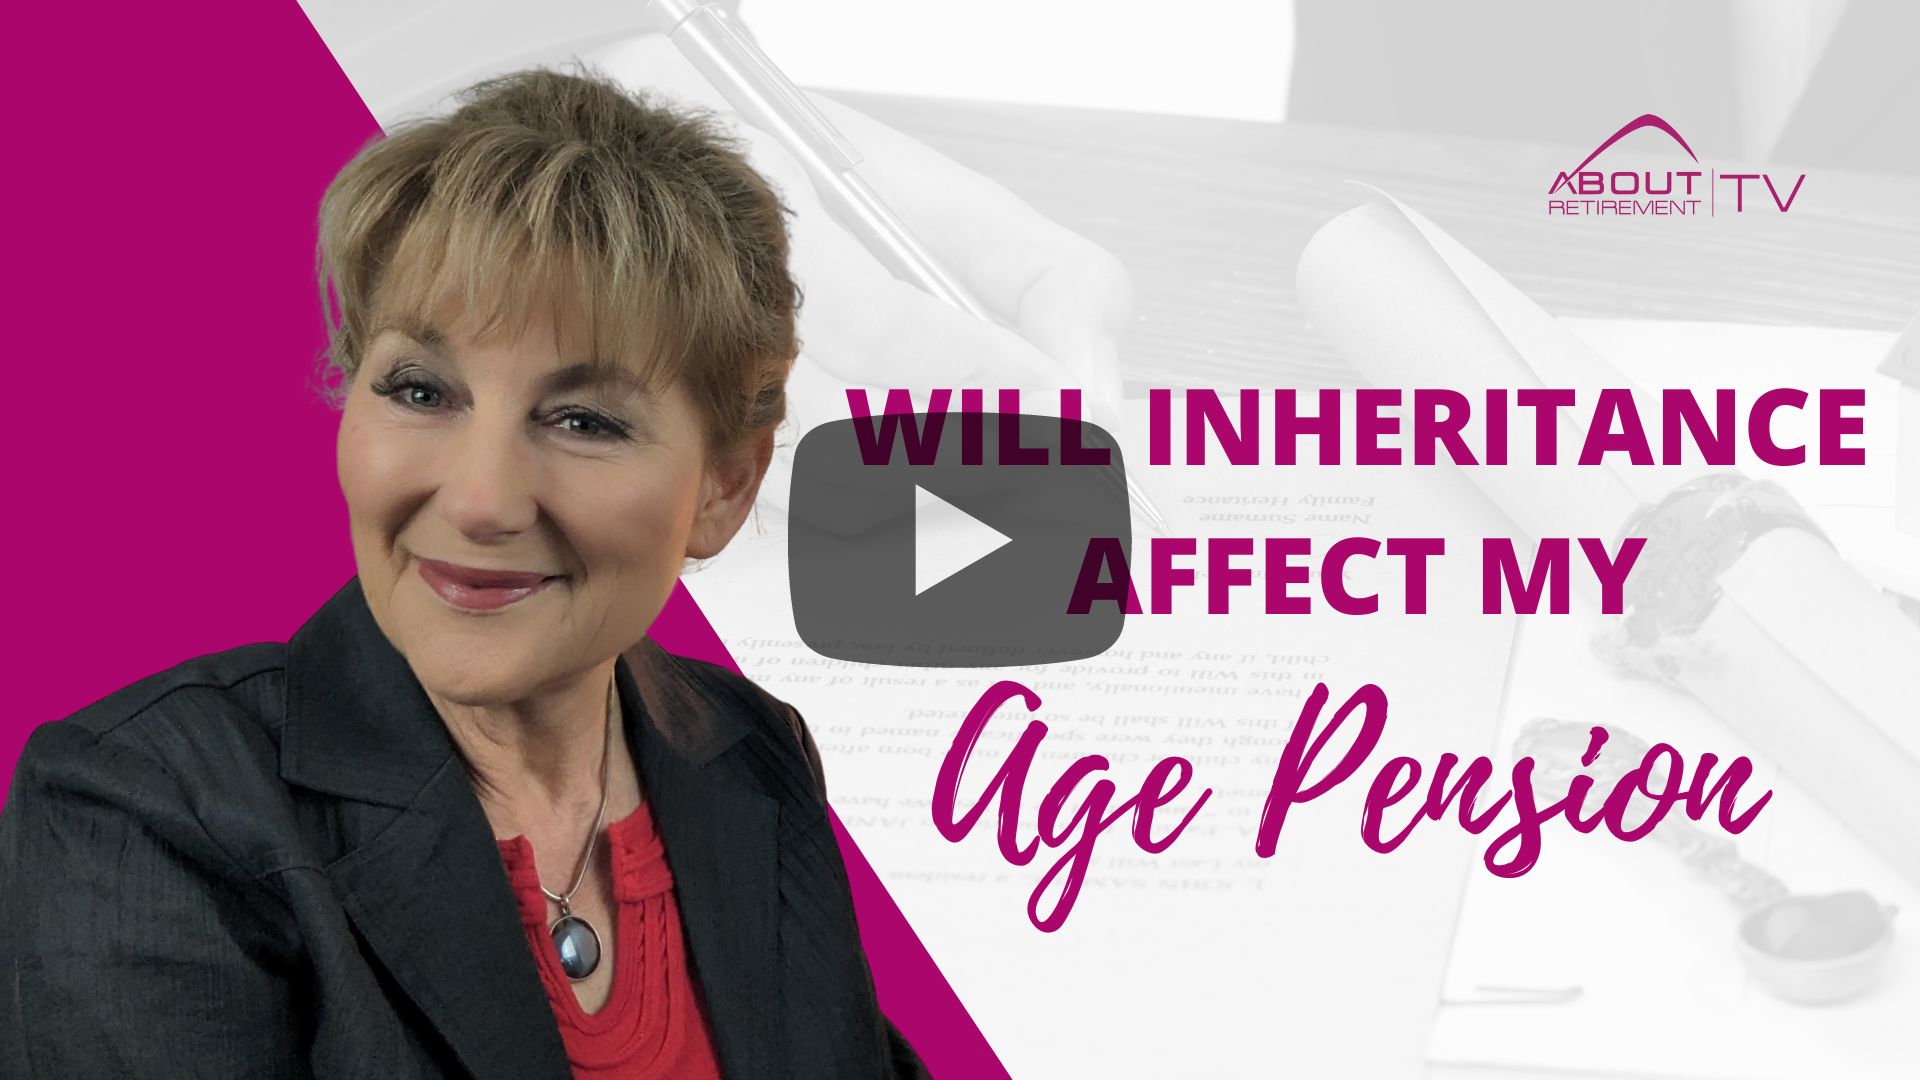 Will inheritance affect my Age Pension?